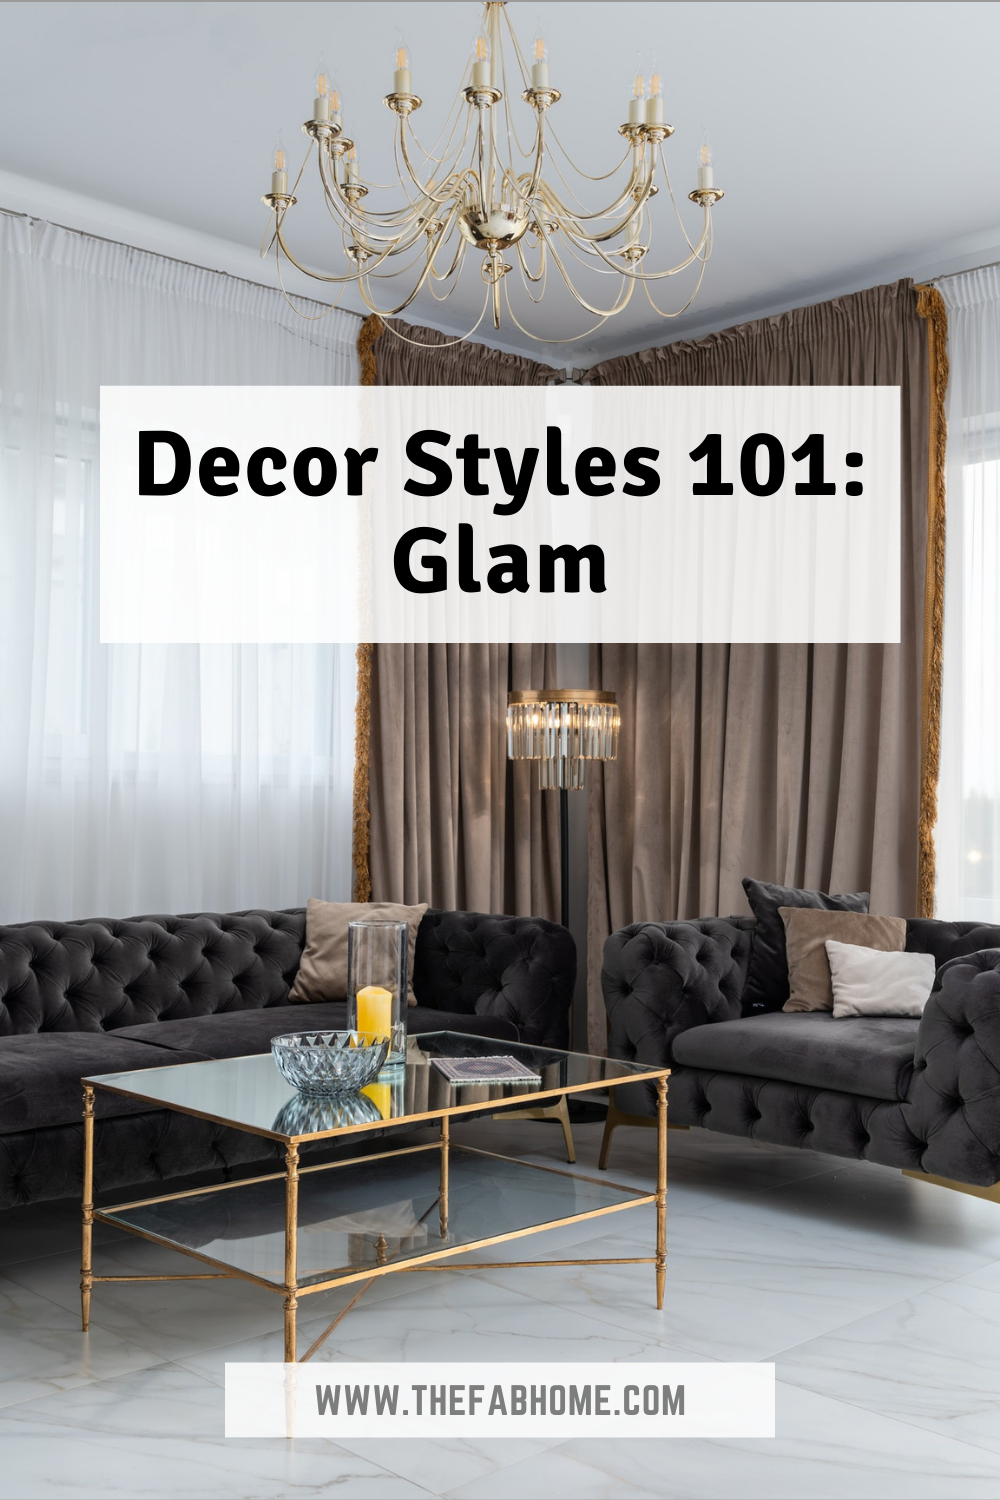 Celebrate the good life by decorating your home in the glam style! With bling, mirrors and more, this style is about appreciating the finer things in life!